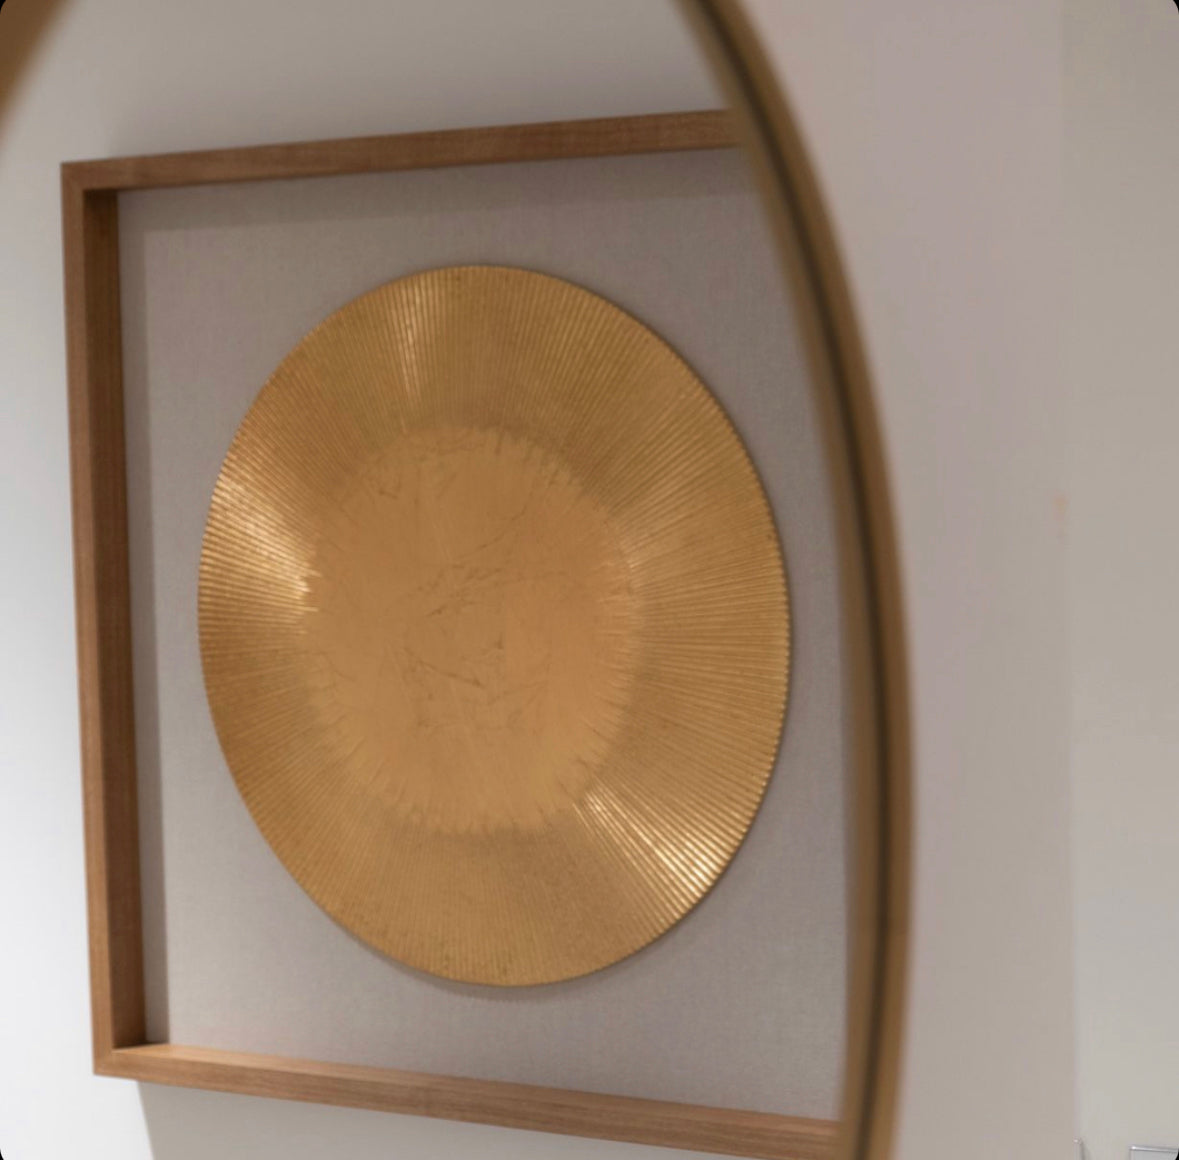 Framed Two Tone Gold/Beige Round Carving Wall Decor